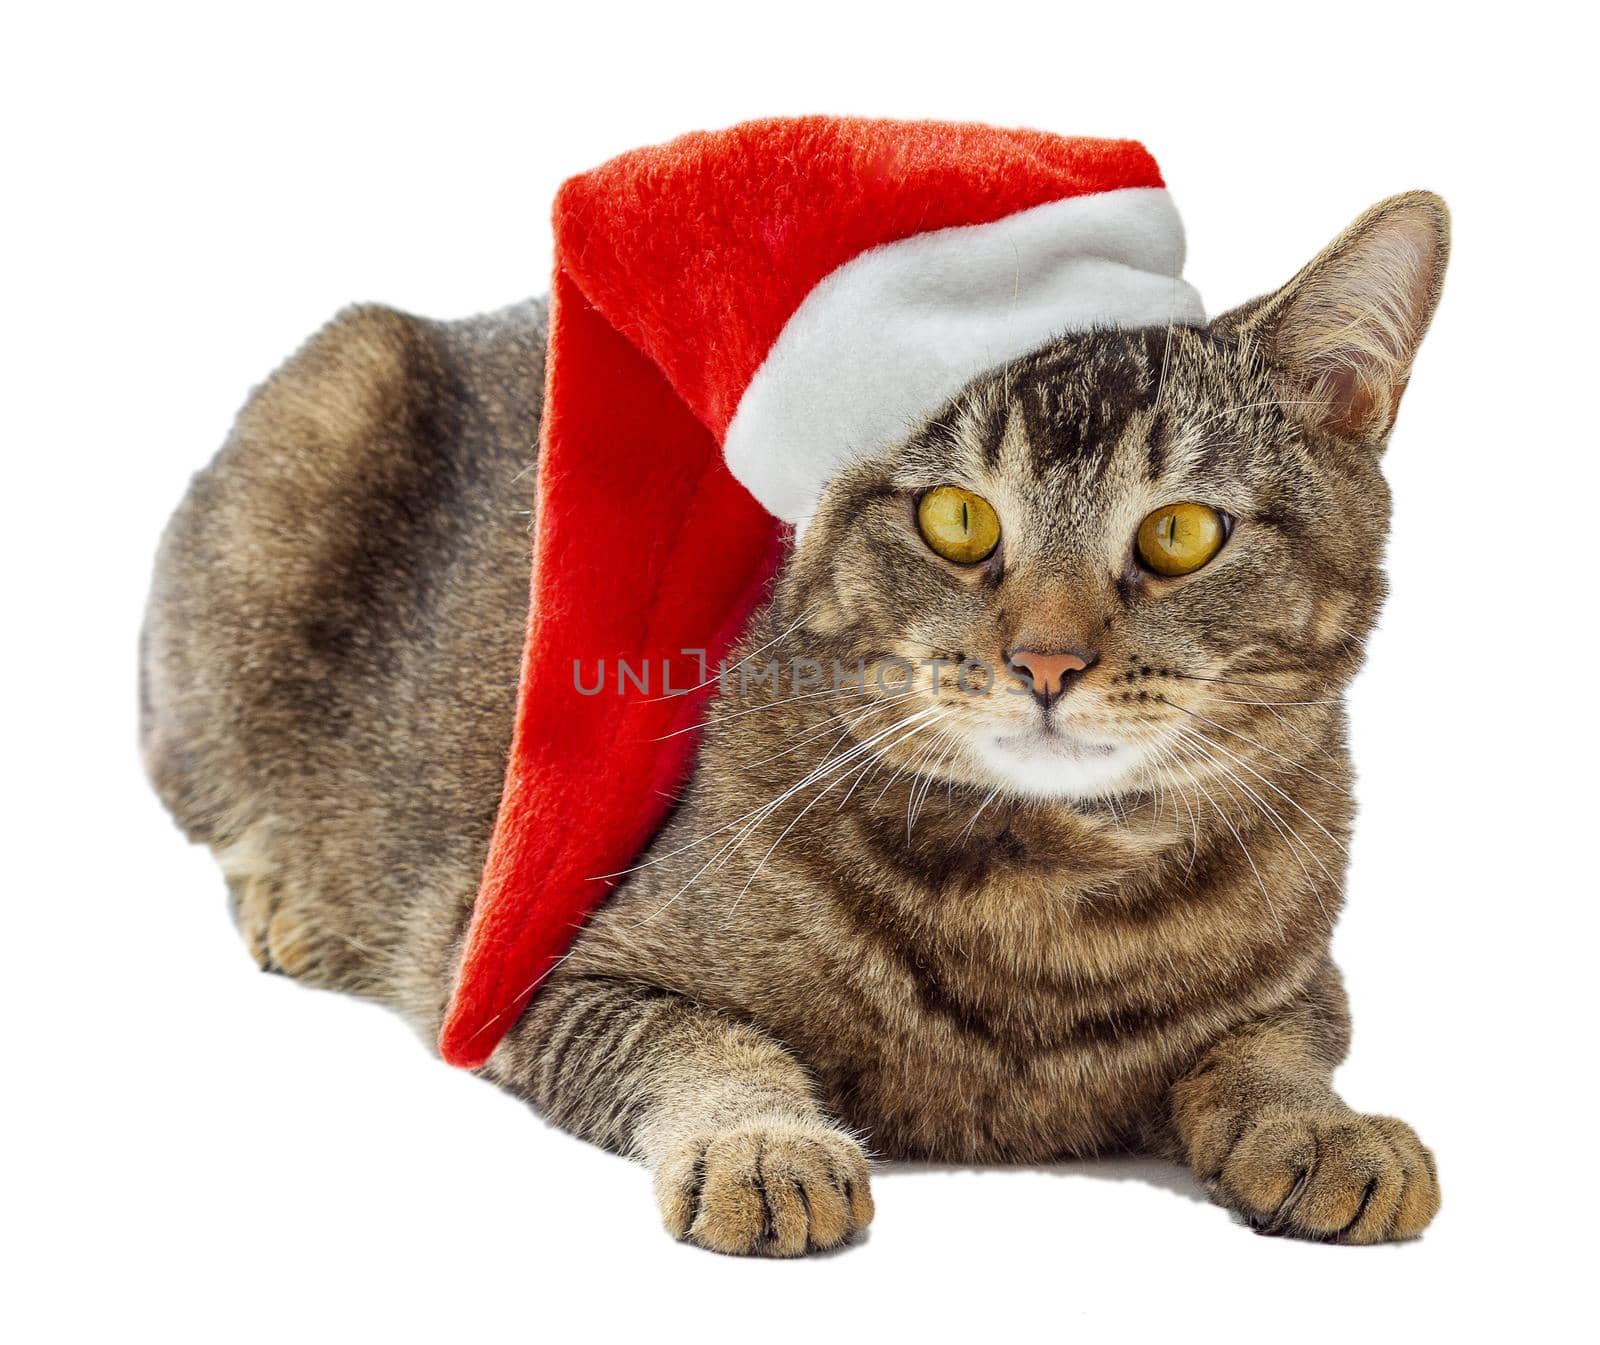 Isolated tricolor cat with yellow eyes and red x-mast santa hat on head looking aside on white background